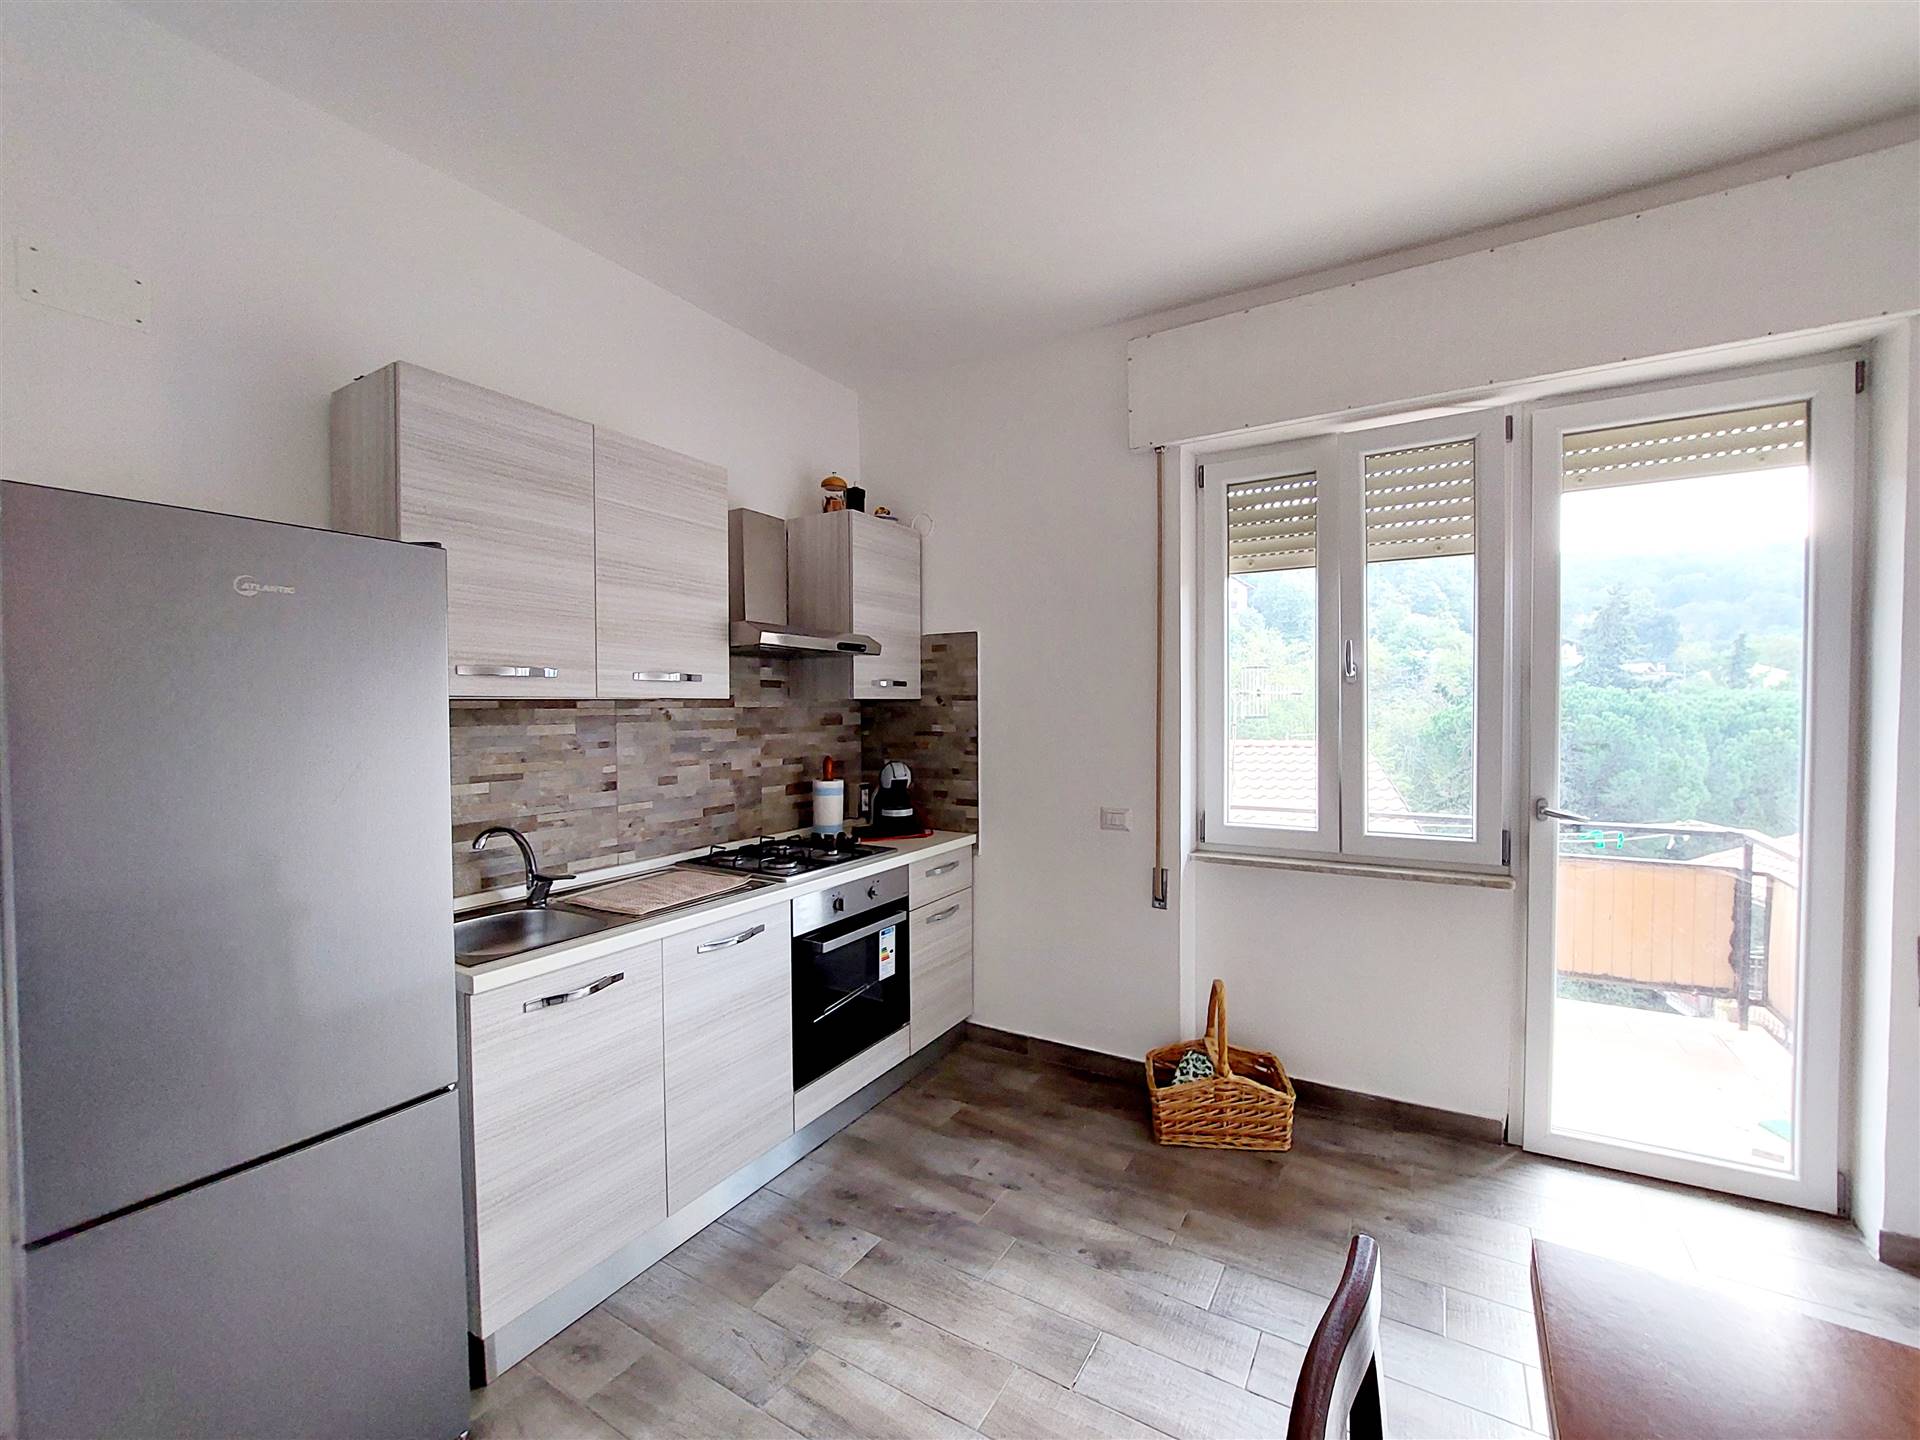 ALLUMIERE, Apartment for sale of 80 Sq. mt., Good condition, Heating Individual heating system, Energetic class: G, placed at 2° on 5, composed by: 3 Rooms, Separate kitchen, , 2 Bedrooms, 1 Bathroom,